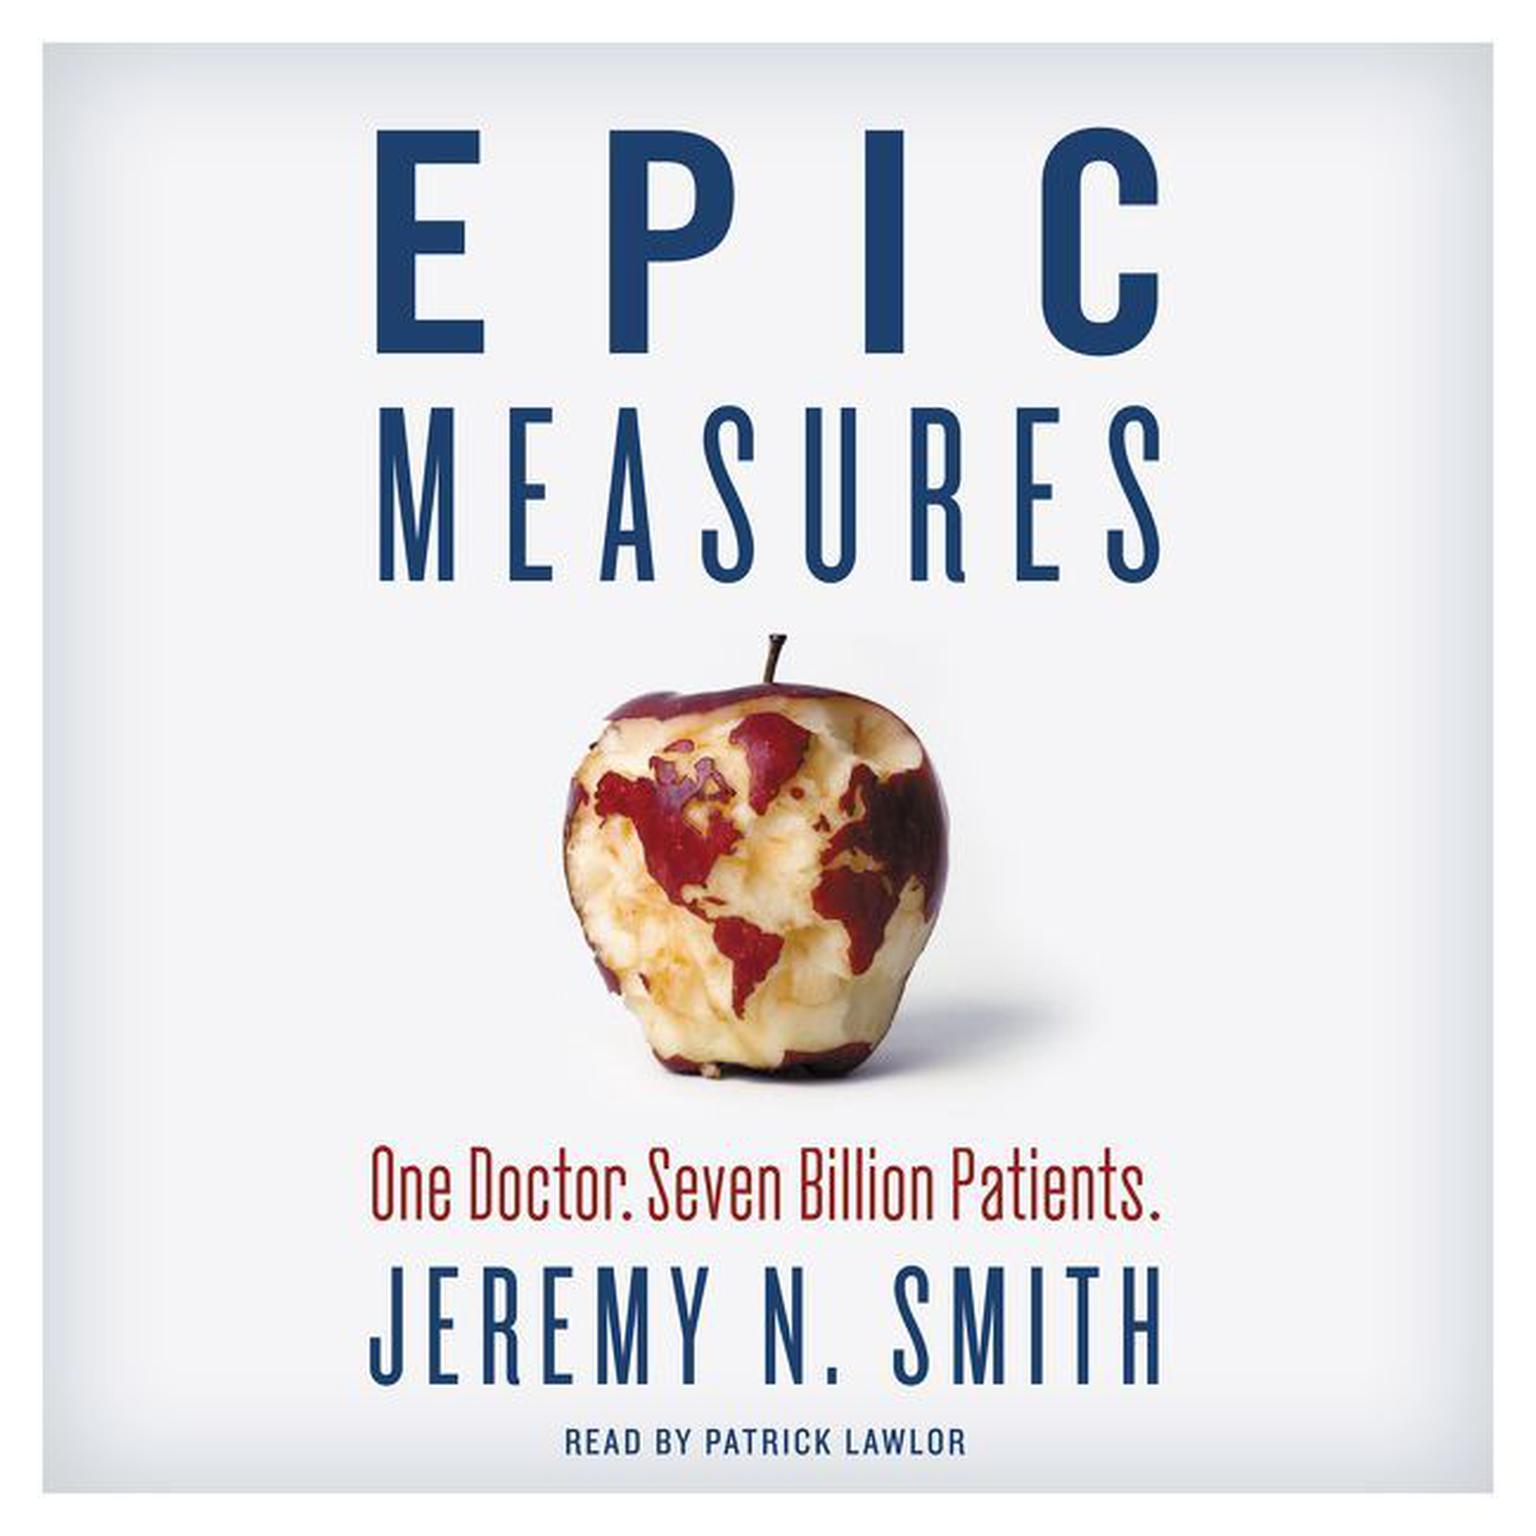 Epic Measures: One Doctor. Seven Billion Patients. Audiobook, by Jeremy N. Smith